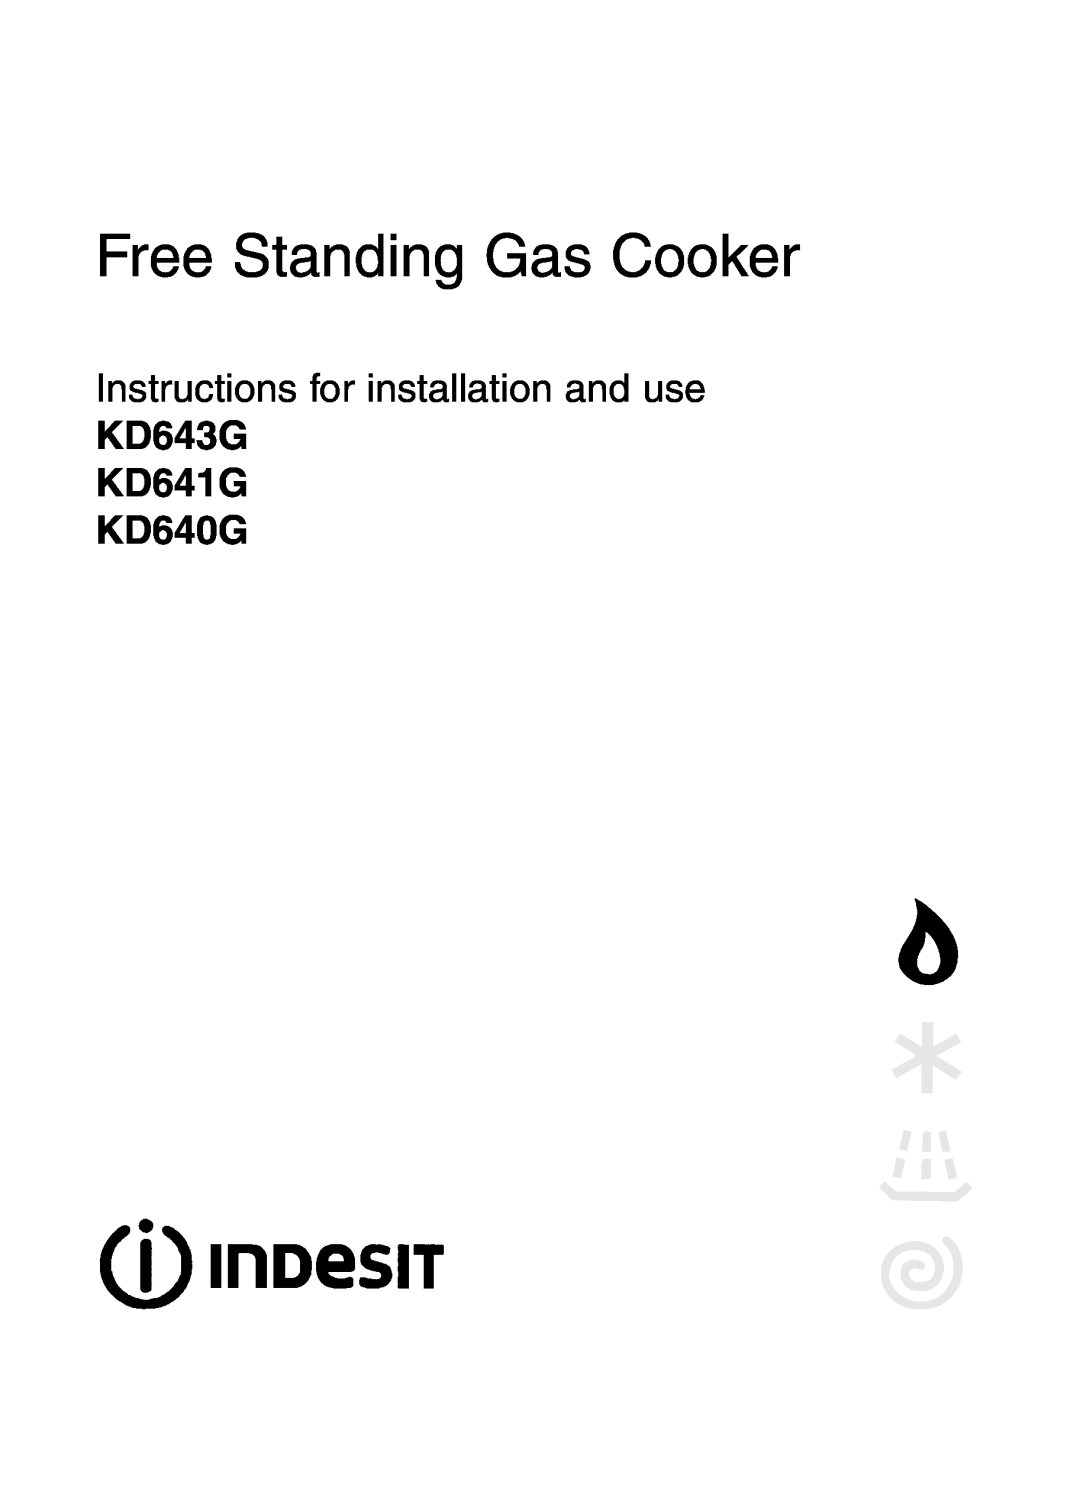 Indesit manual Free Standing Gas Cooker, Instructions for installation and use, KD643G KD641G KD640G 